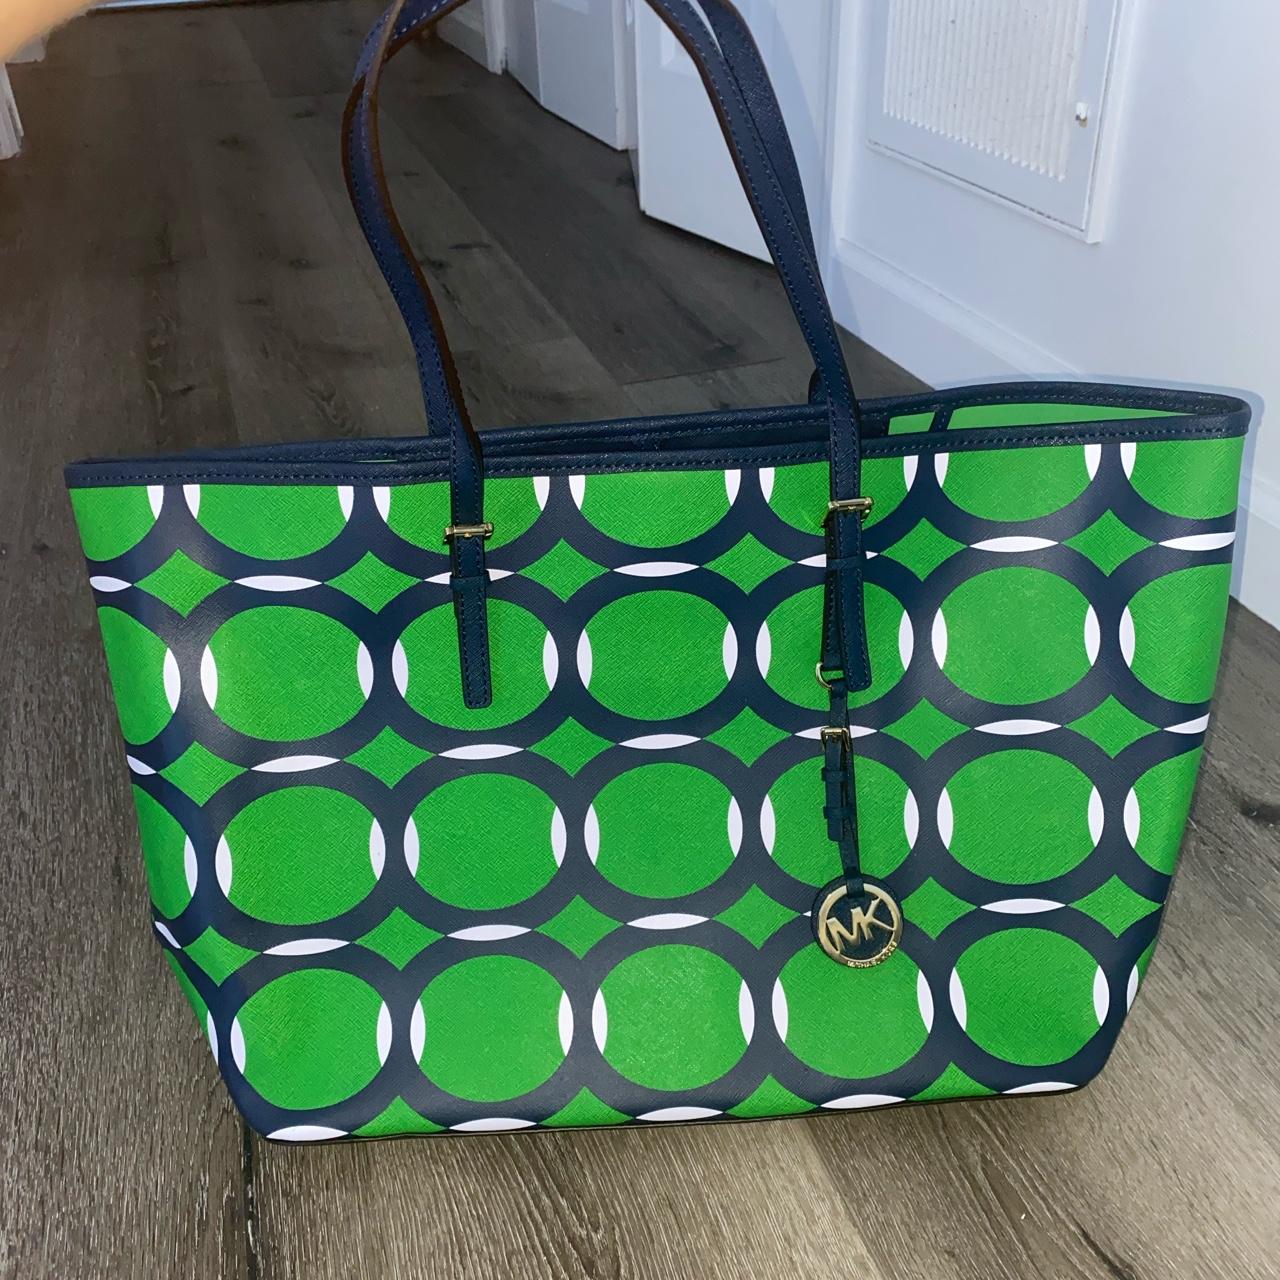 Brand new Jet set travel tote bag from Micheal kors - Depop